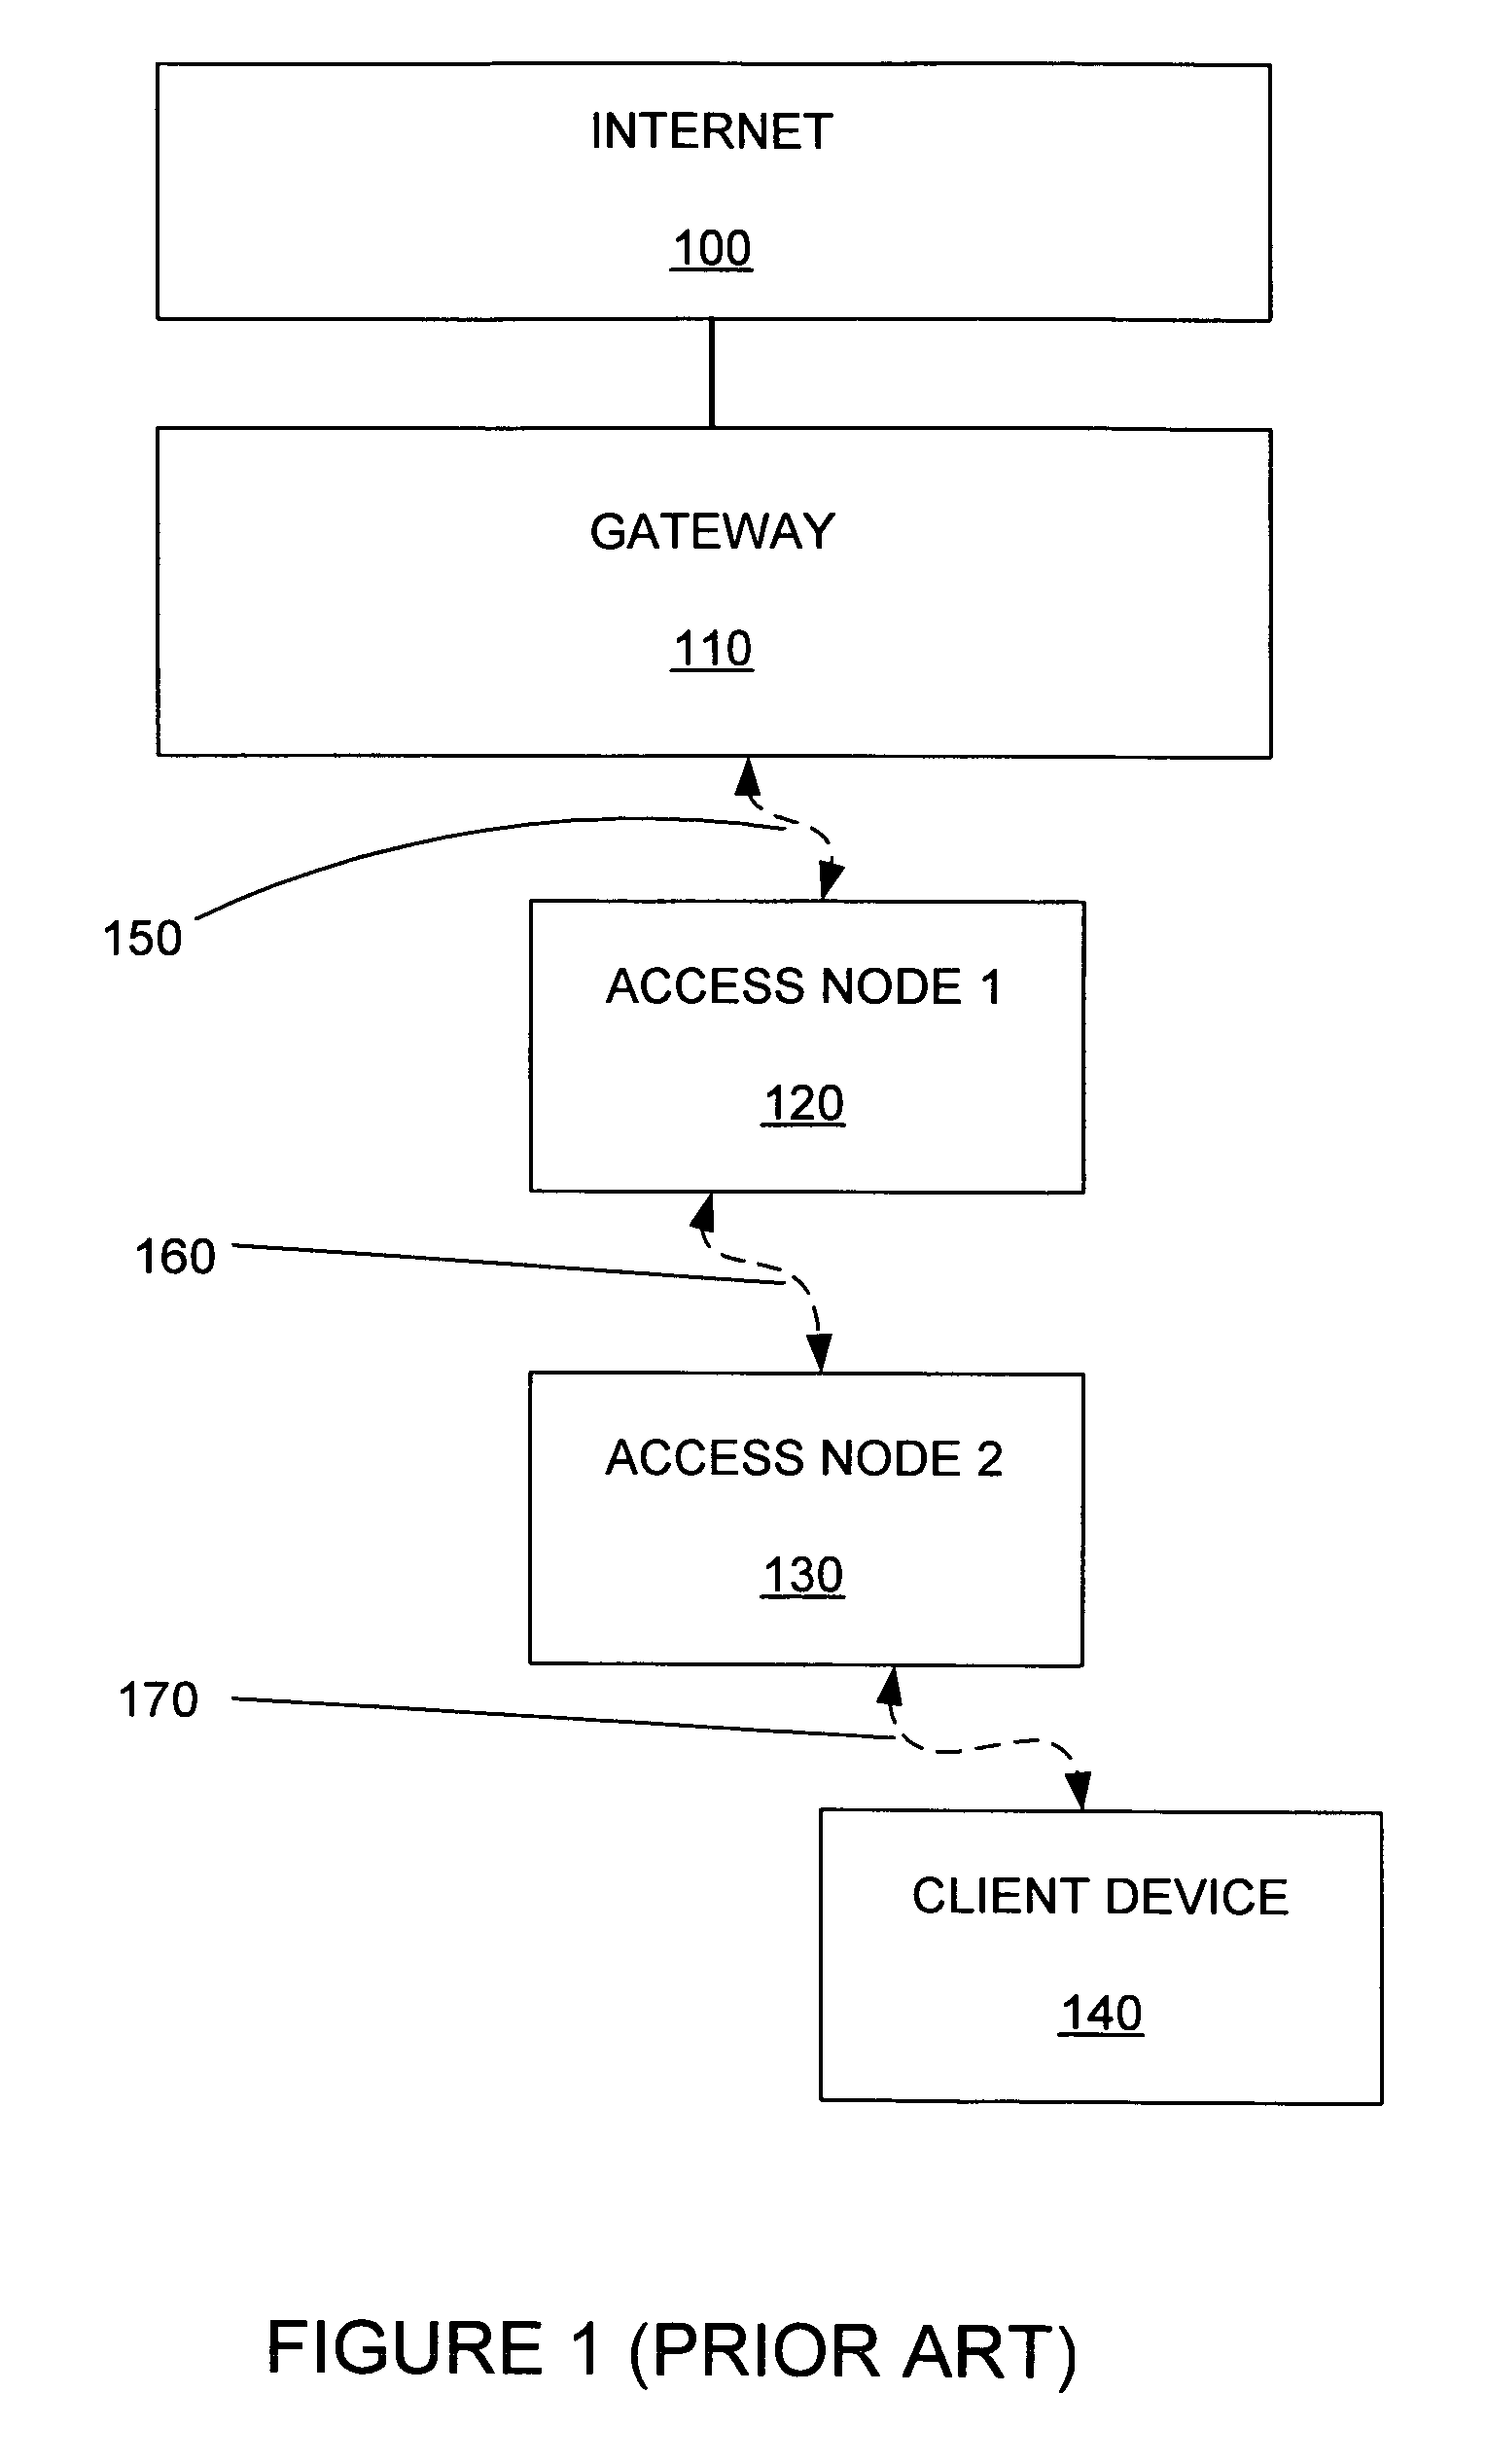 Mesh network that includes fixed and mobile access nodes